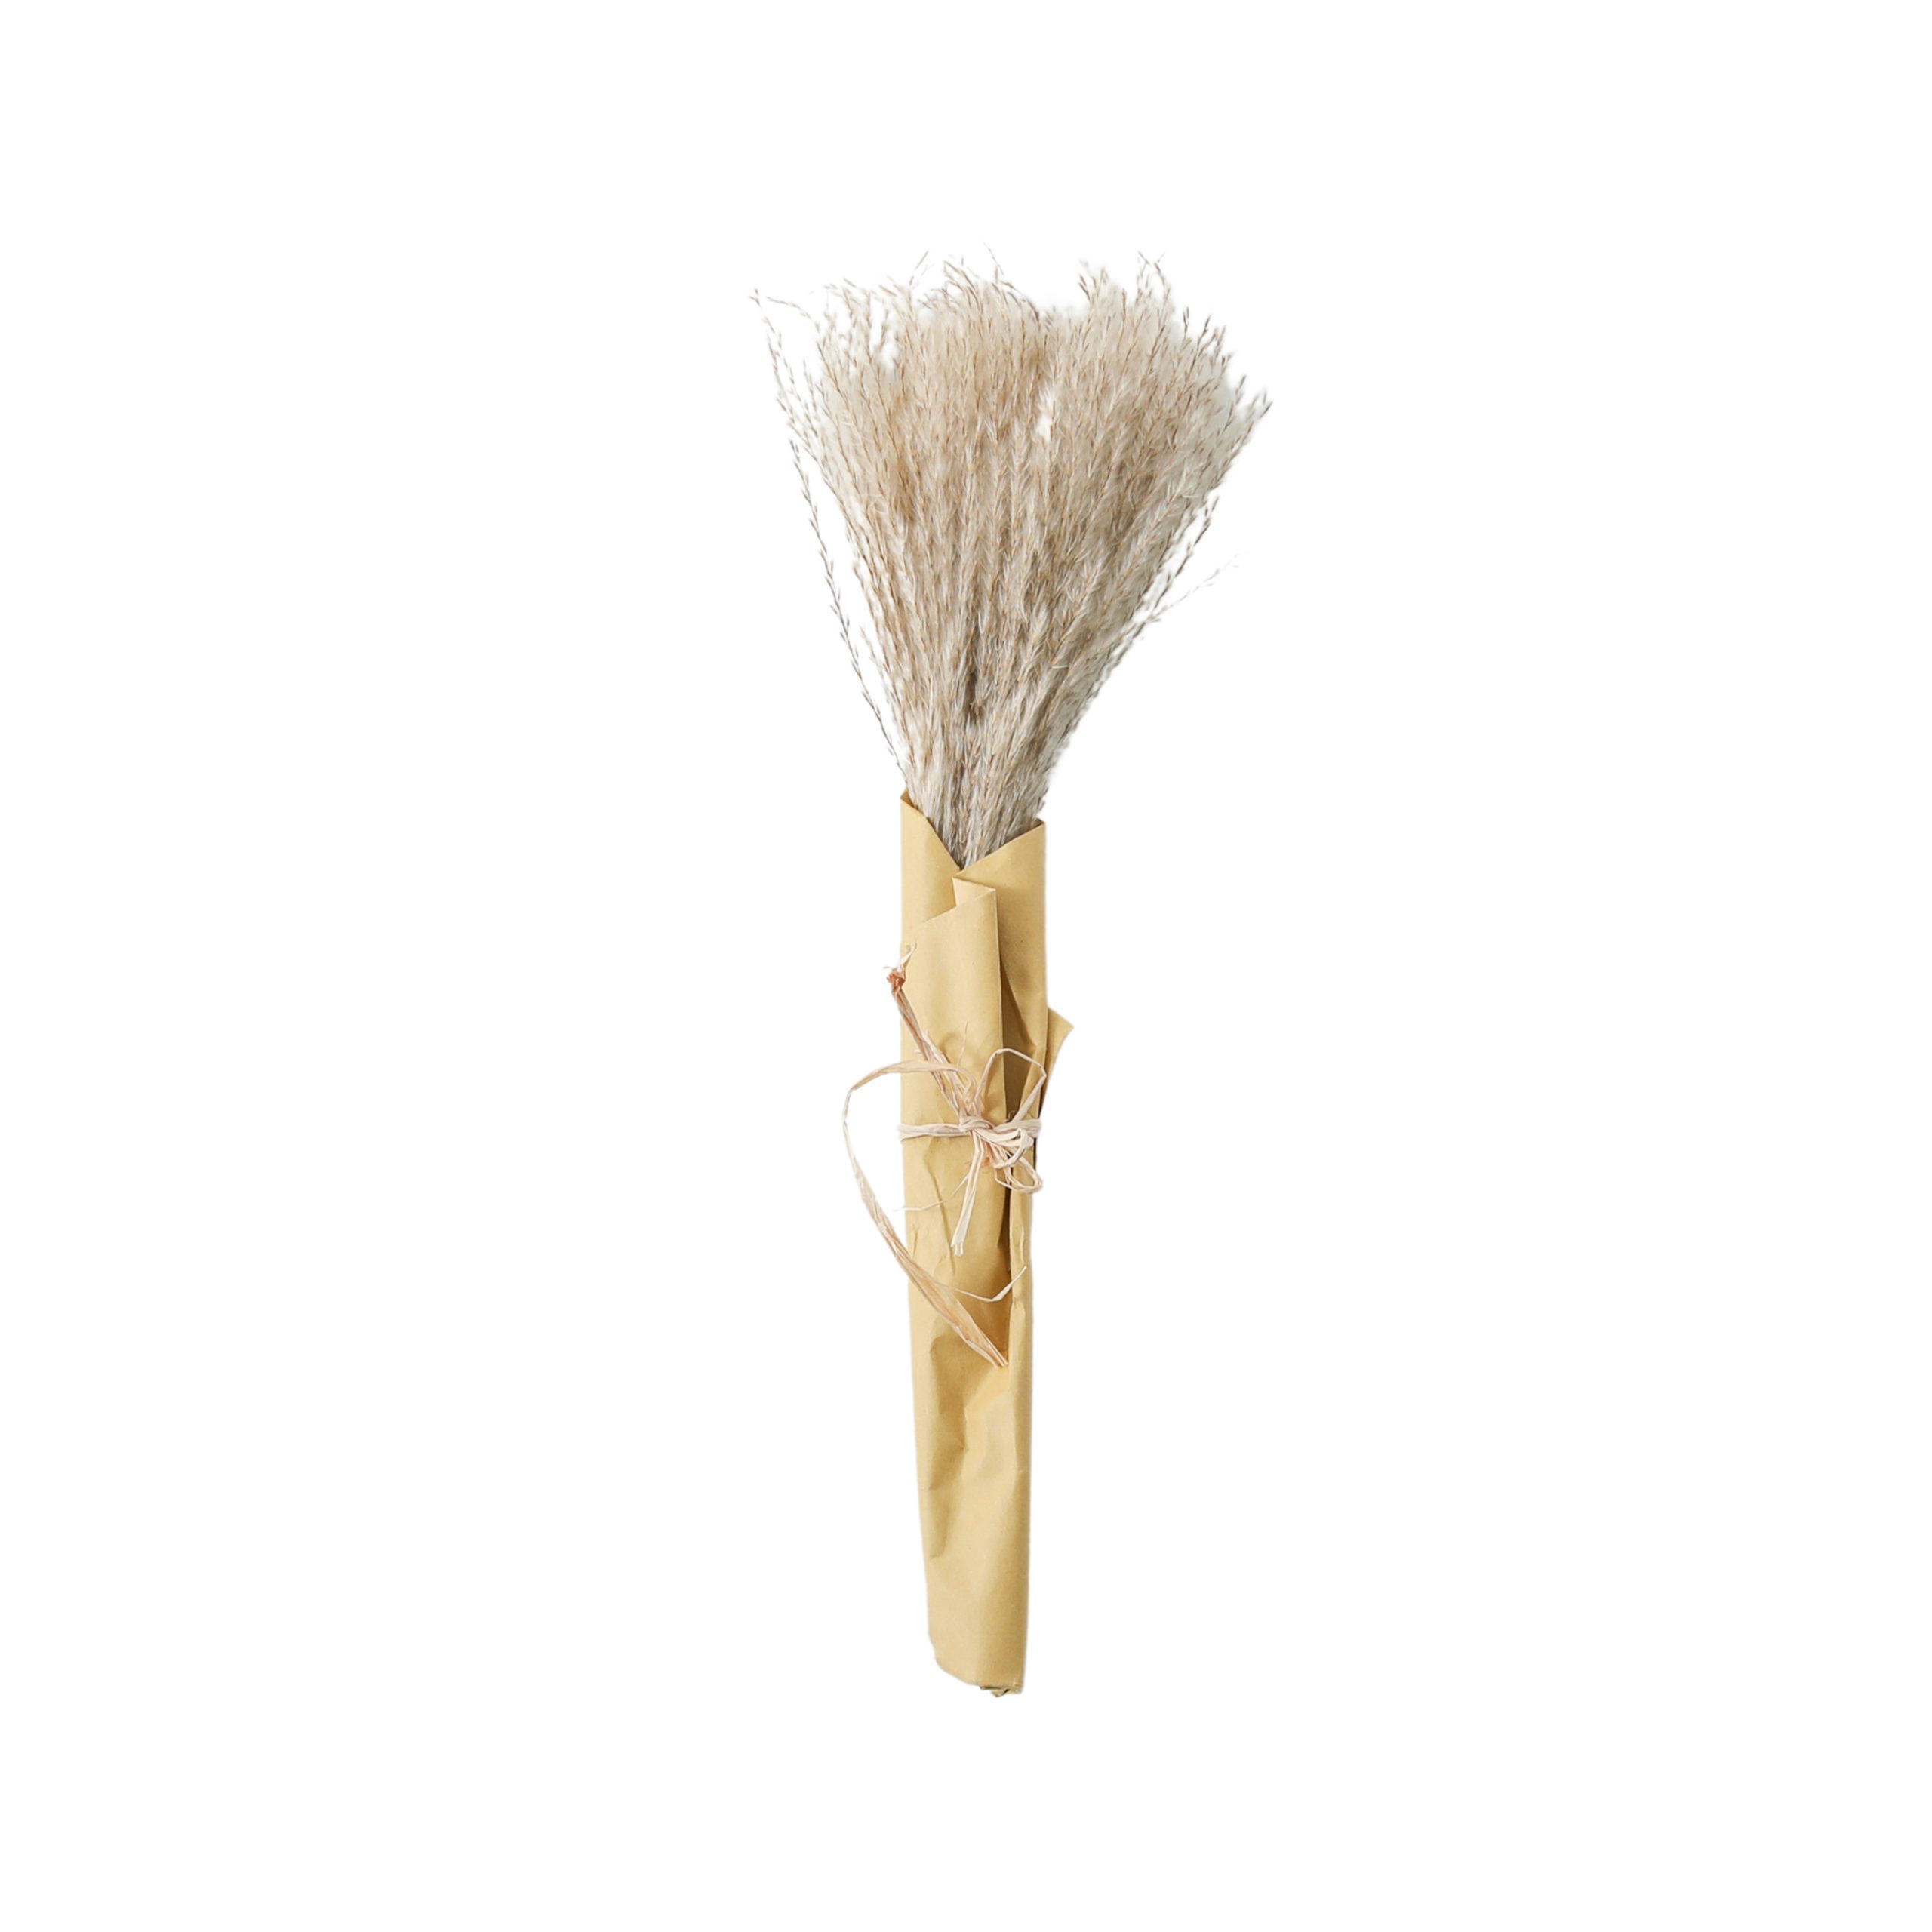 Gallery Direct Dried Reed Grass Bundle Paper Wrap Natural